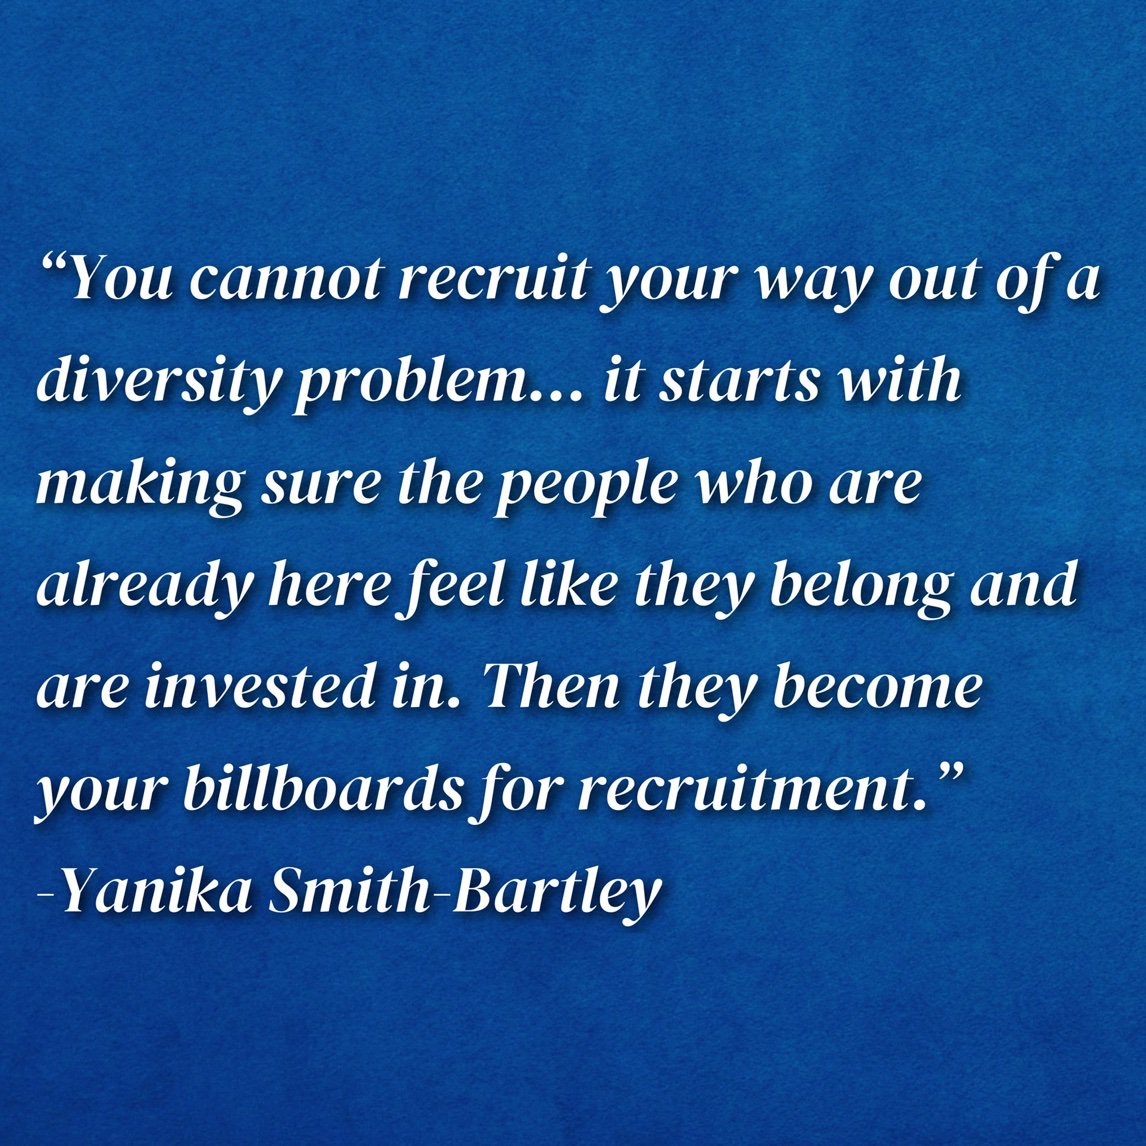 Asurion’s Yanika Smith-Bartley brings invaluable insight as she speaks to #GDLENewNashville on the importance of investing in what matters: the people.👏 
#Diversity #Inclusion #NewNashville #InclusionIsHappening https://t.co/PN8yXDqMBC.